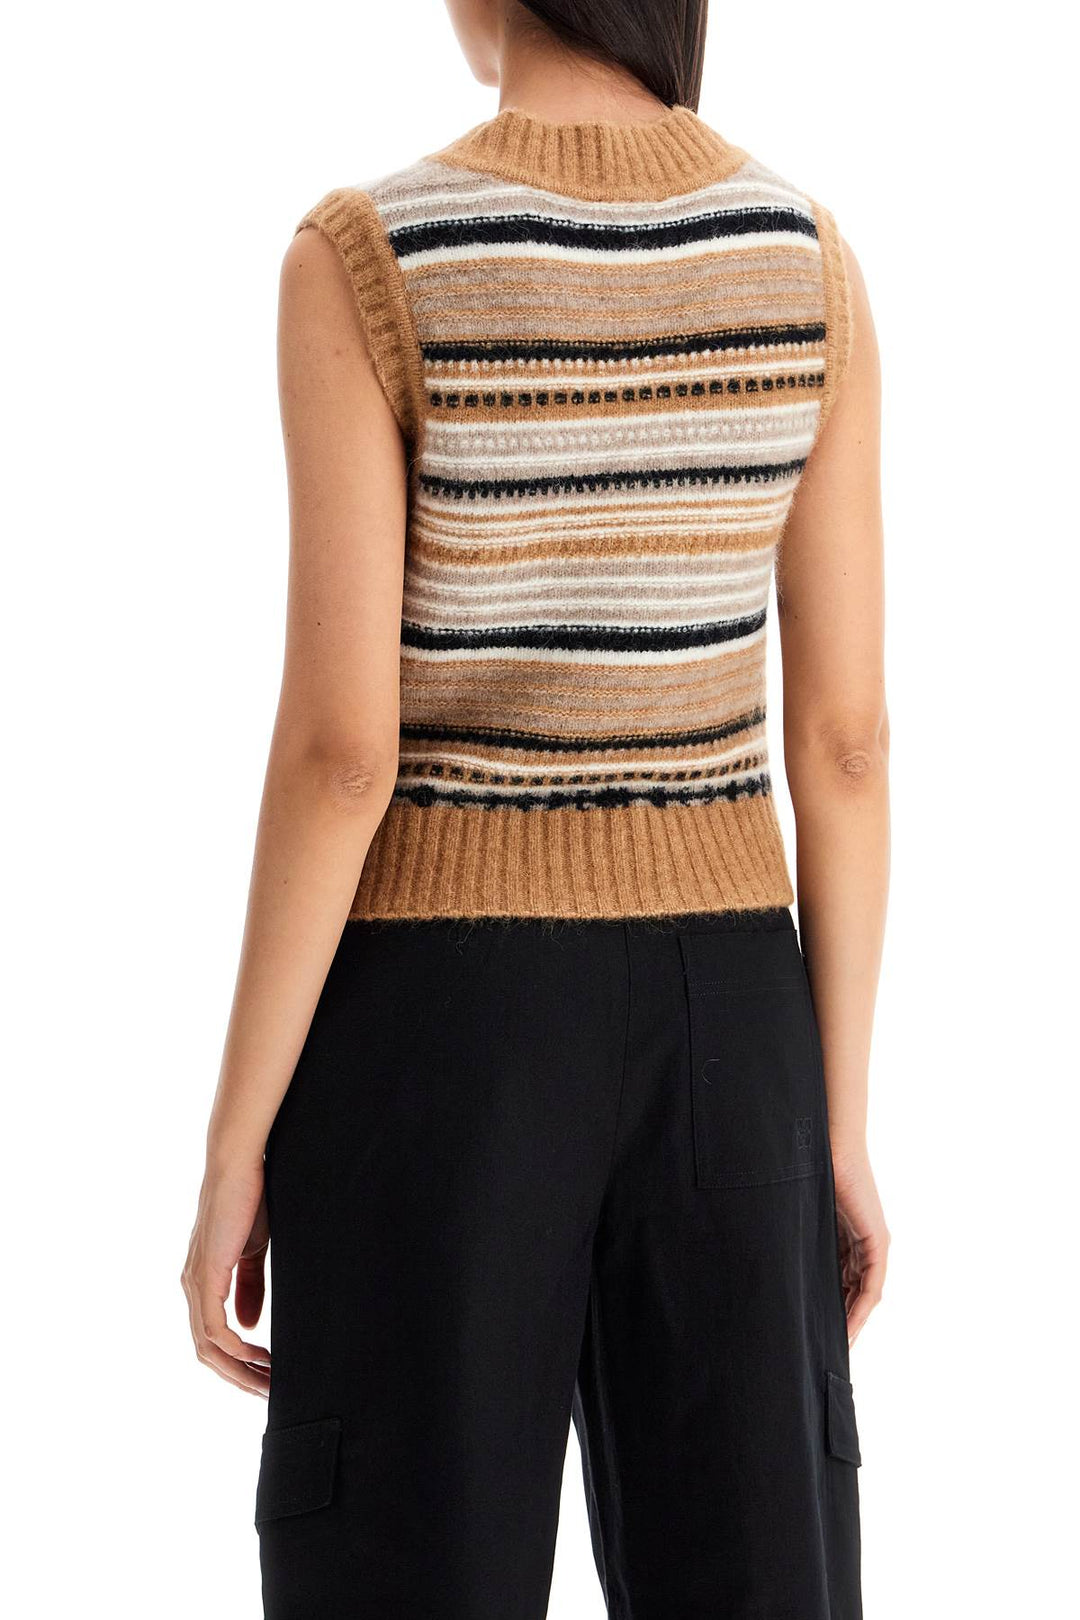 Ganni Soft Striped Knit Vest With A Comfortable   Beige